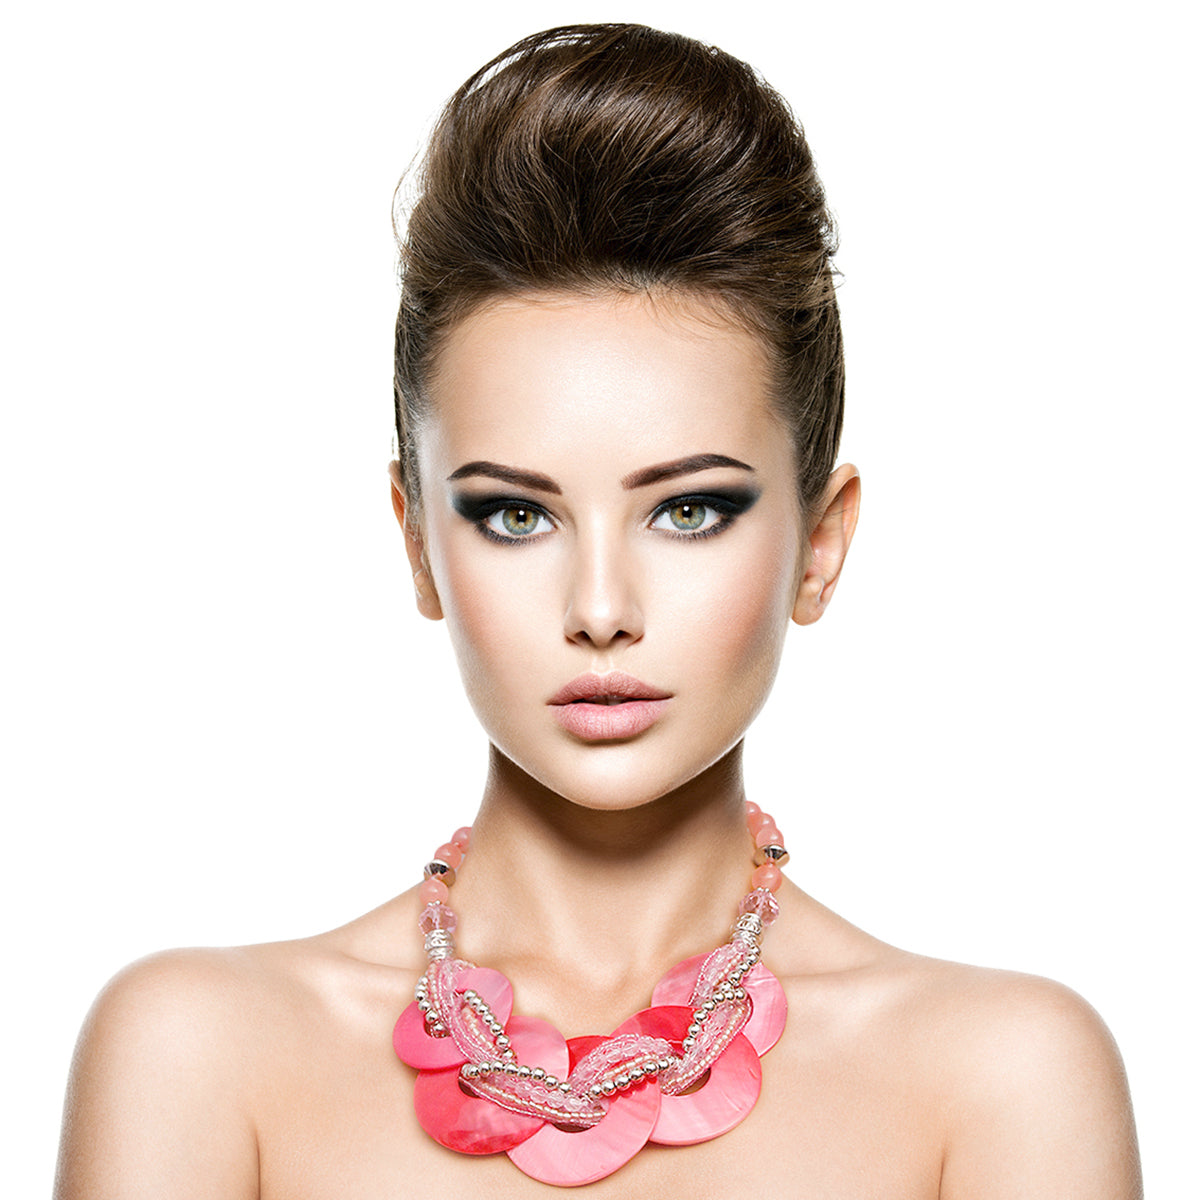 Pink Beaded Disc Necklace Set